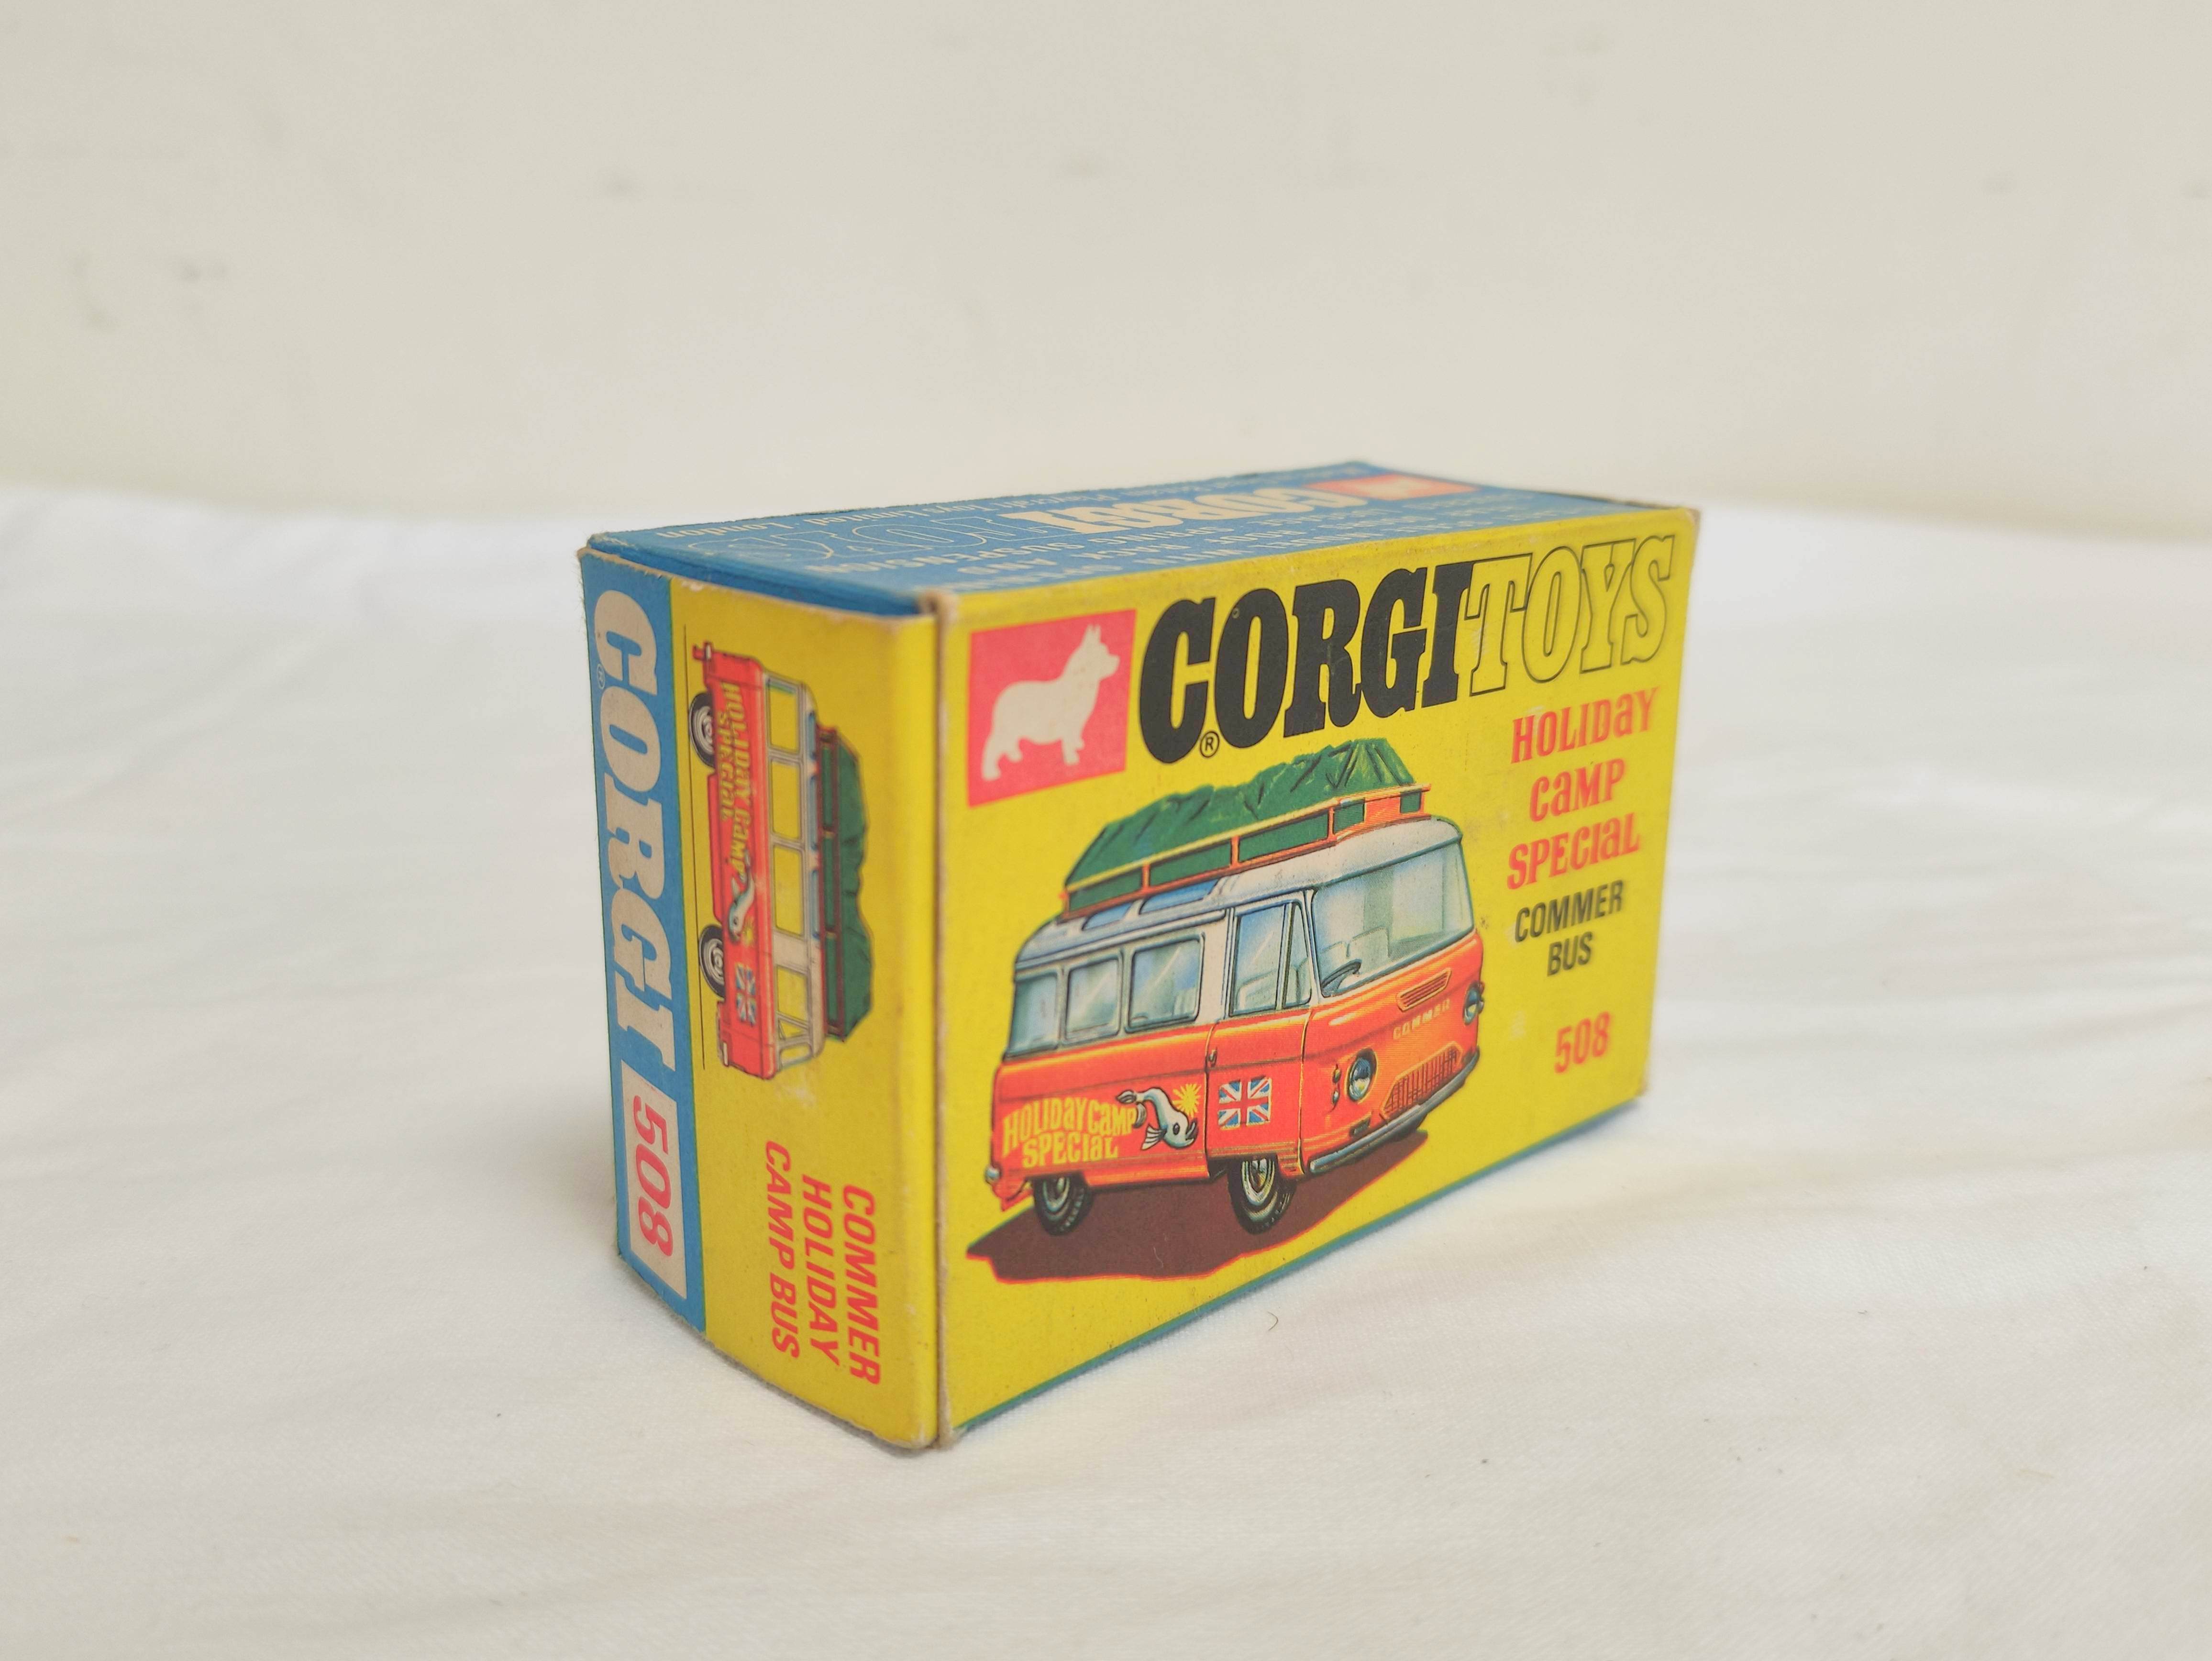 Corgi Toys- Boxed no 508 Holiday Camp Special Commer Bus 2500 series with orange and white body, - Image 2 of 7